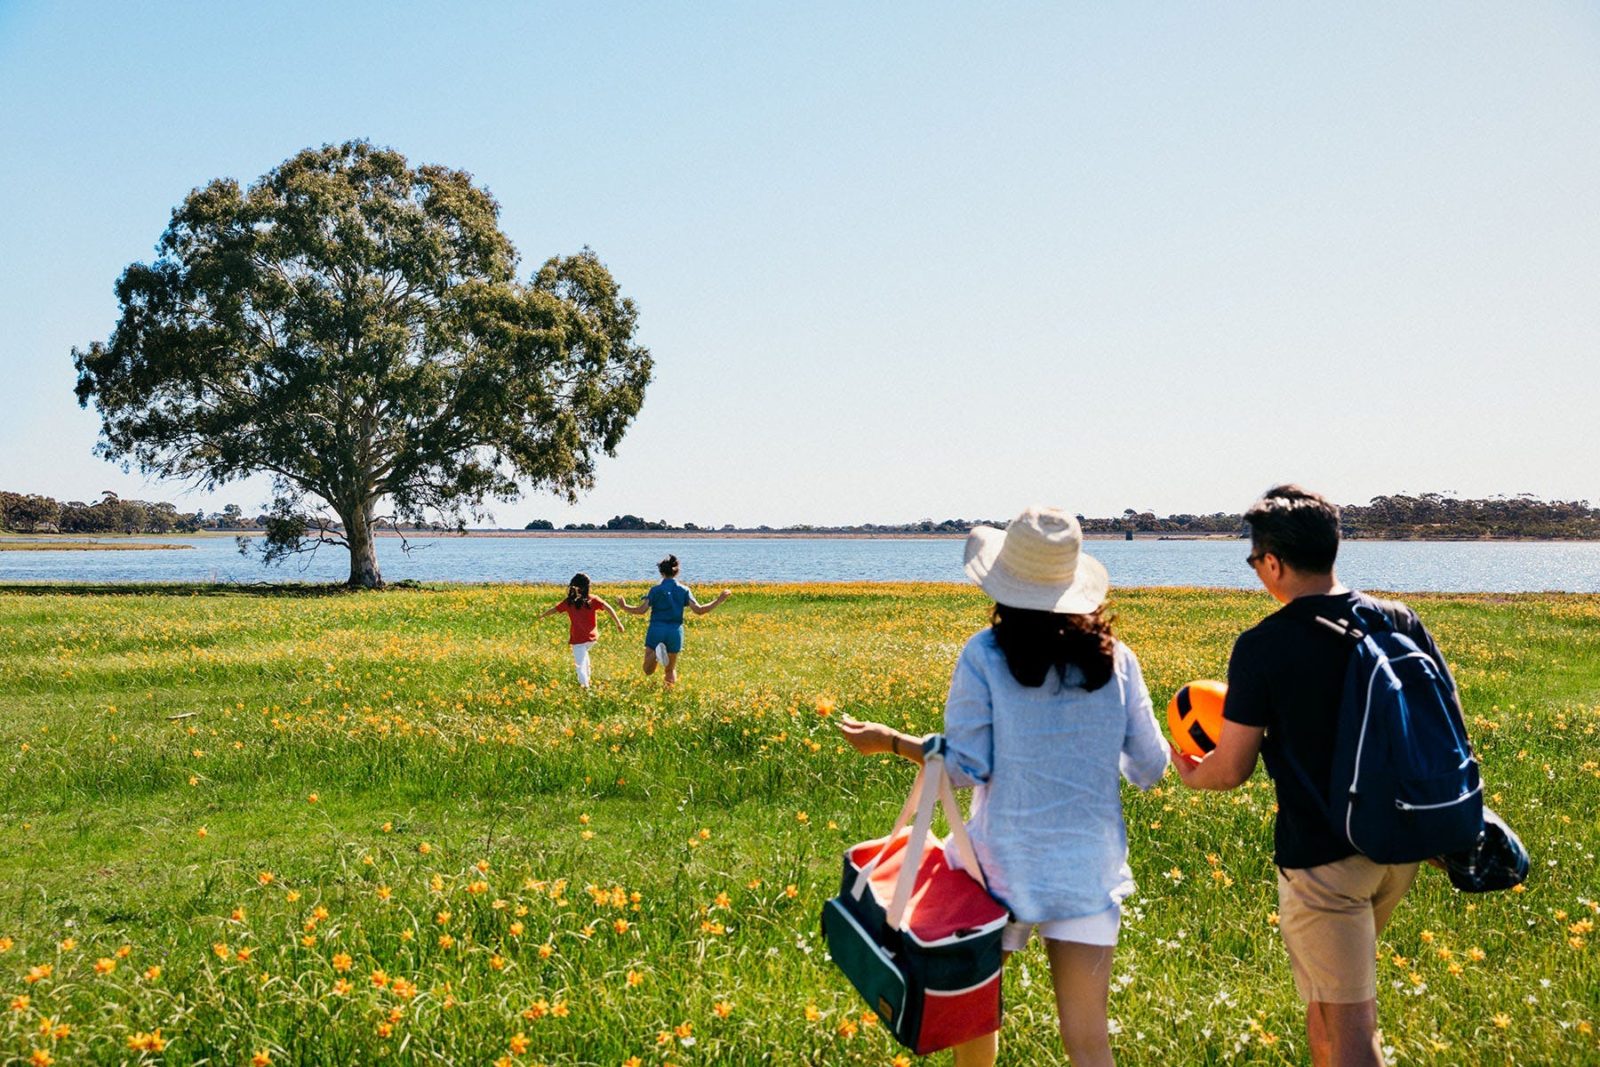 Picnicking facilities including a barbeque are available at Happy Valley Reservoir Reserve